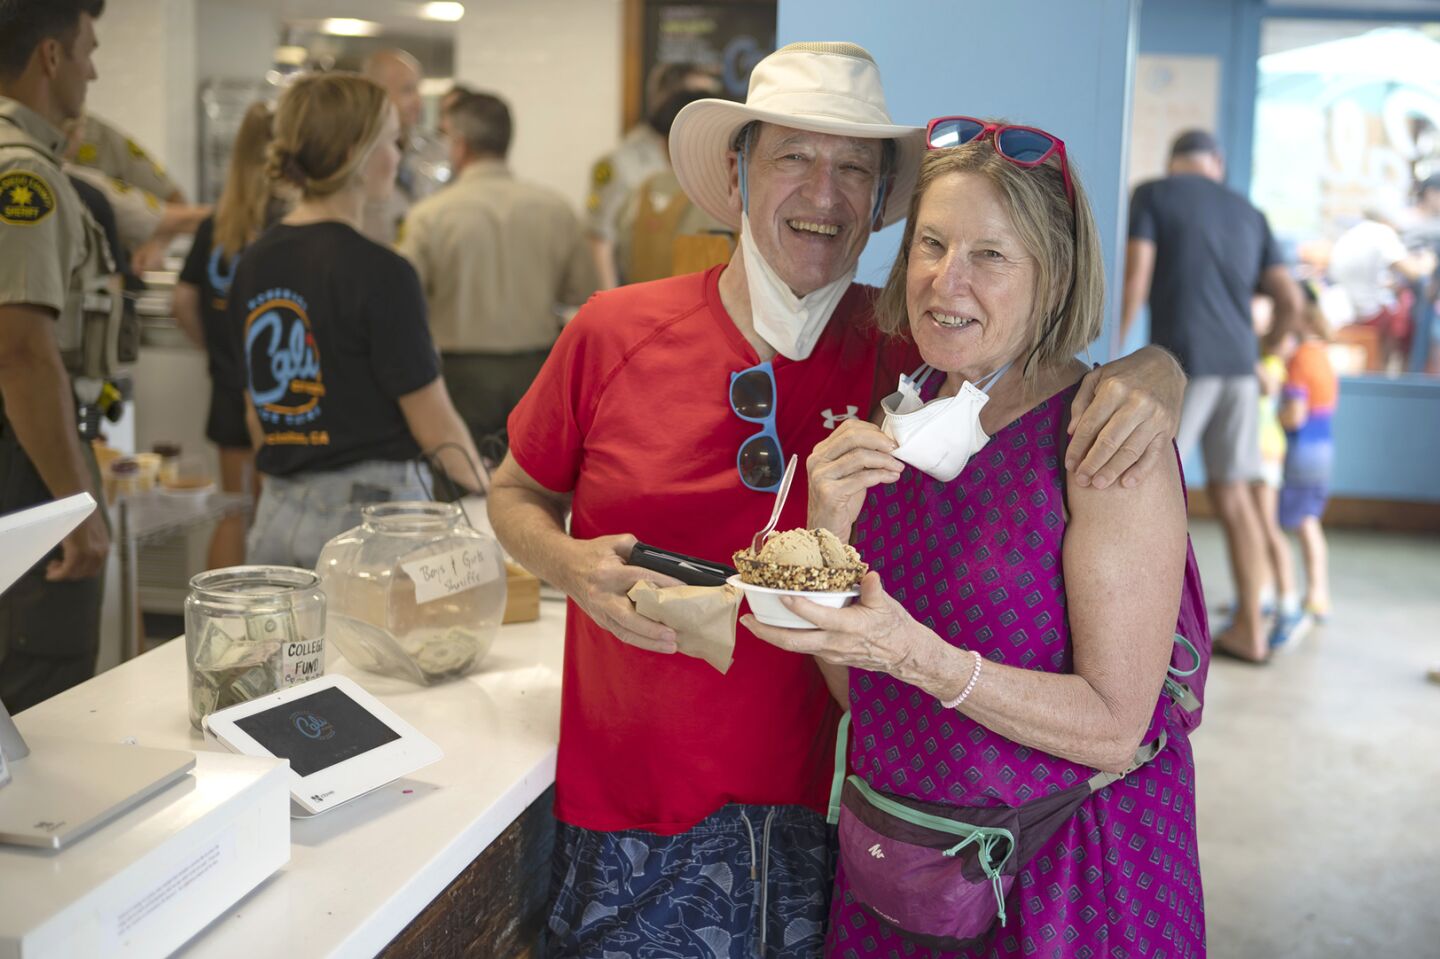 Visitors from Texas, Norman Miller and Marilee Steiner stopped by for some ice cream